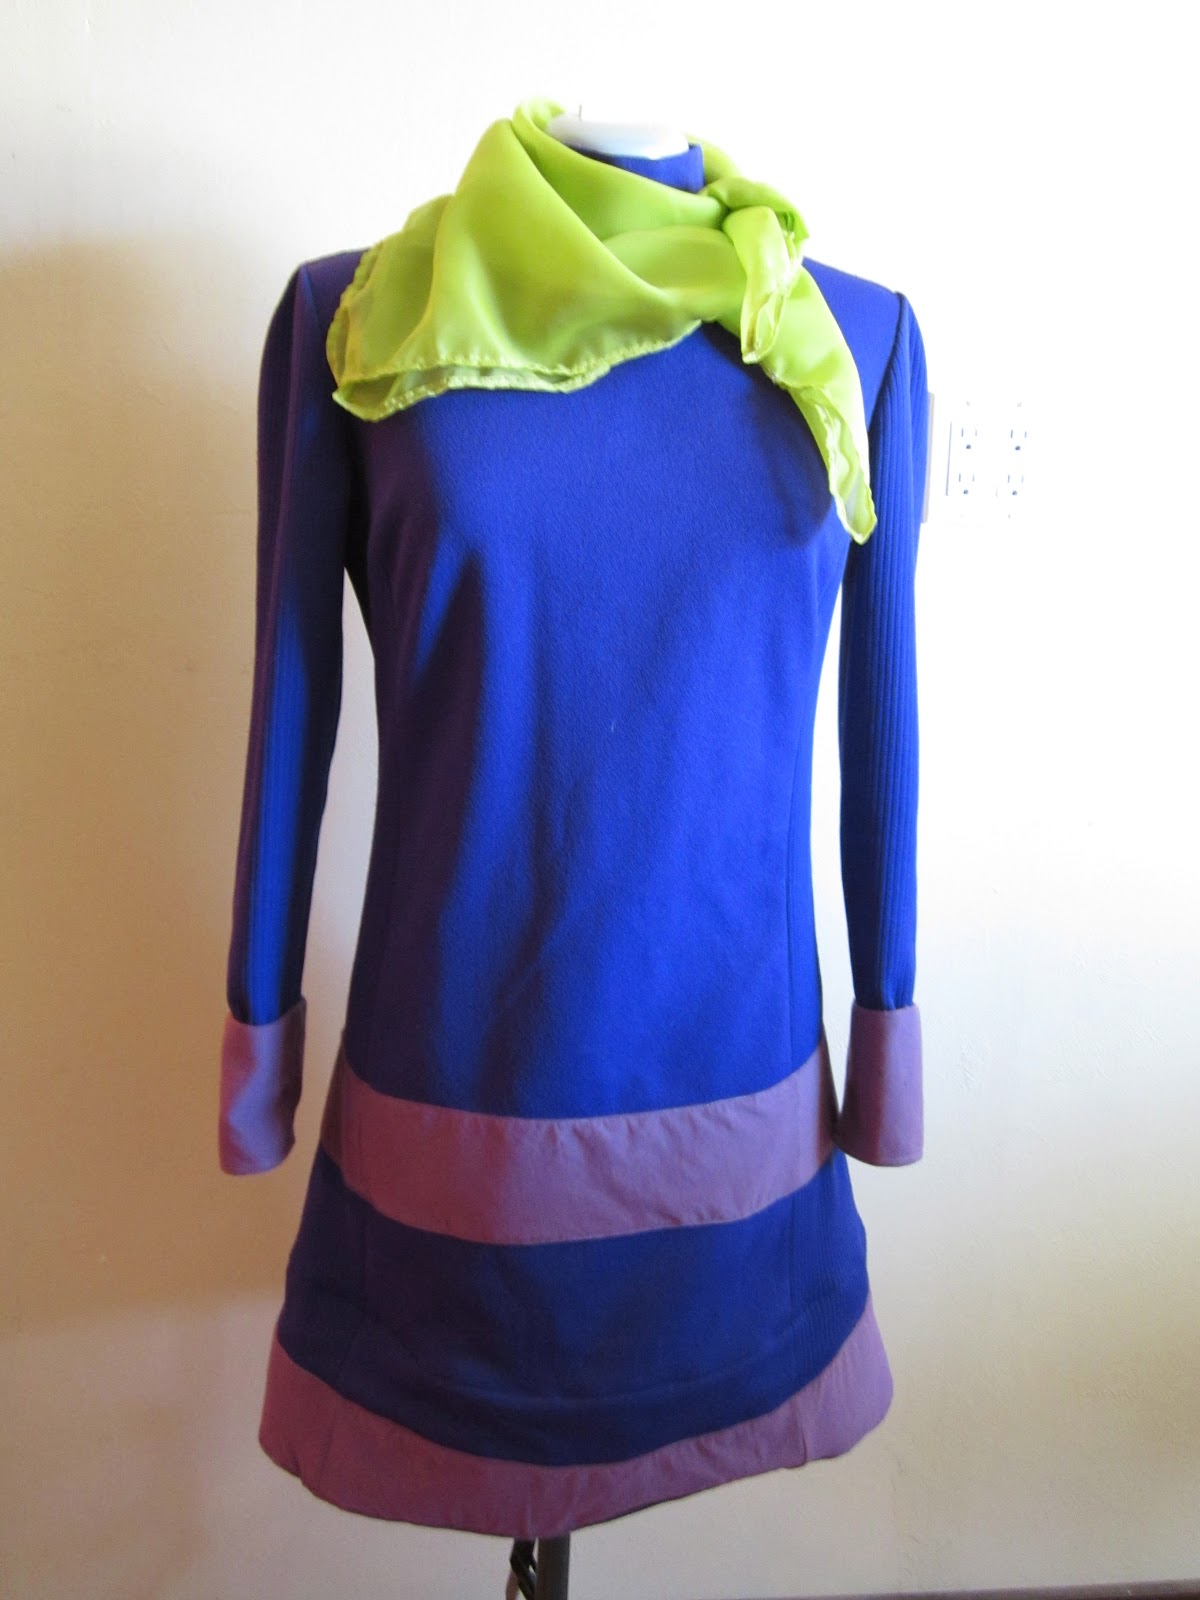 Keep Calm and Costume On: Daphne Blake - Completed